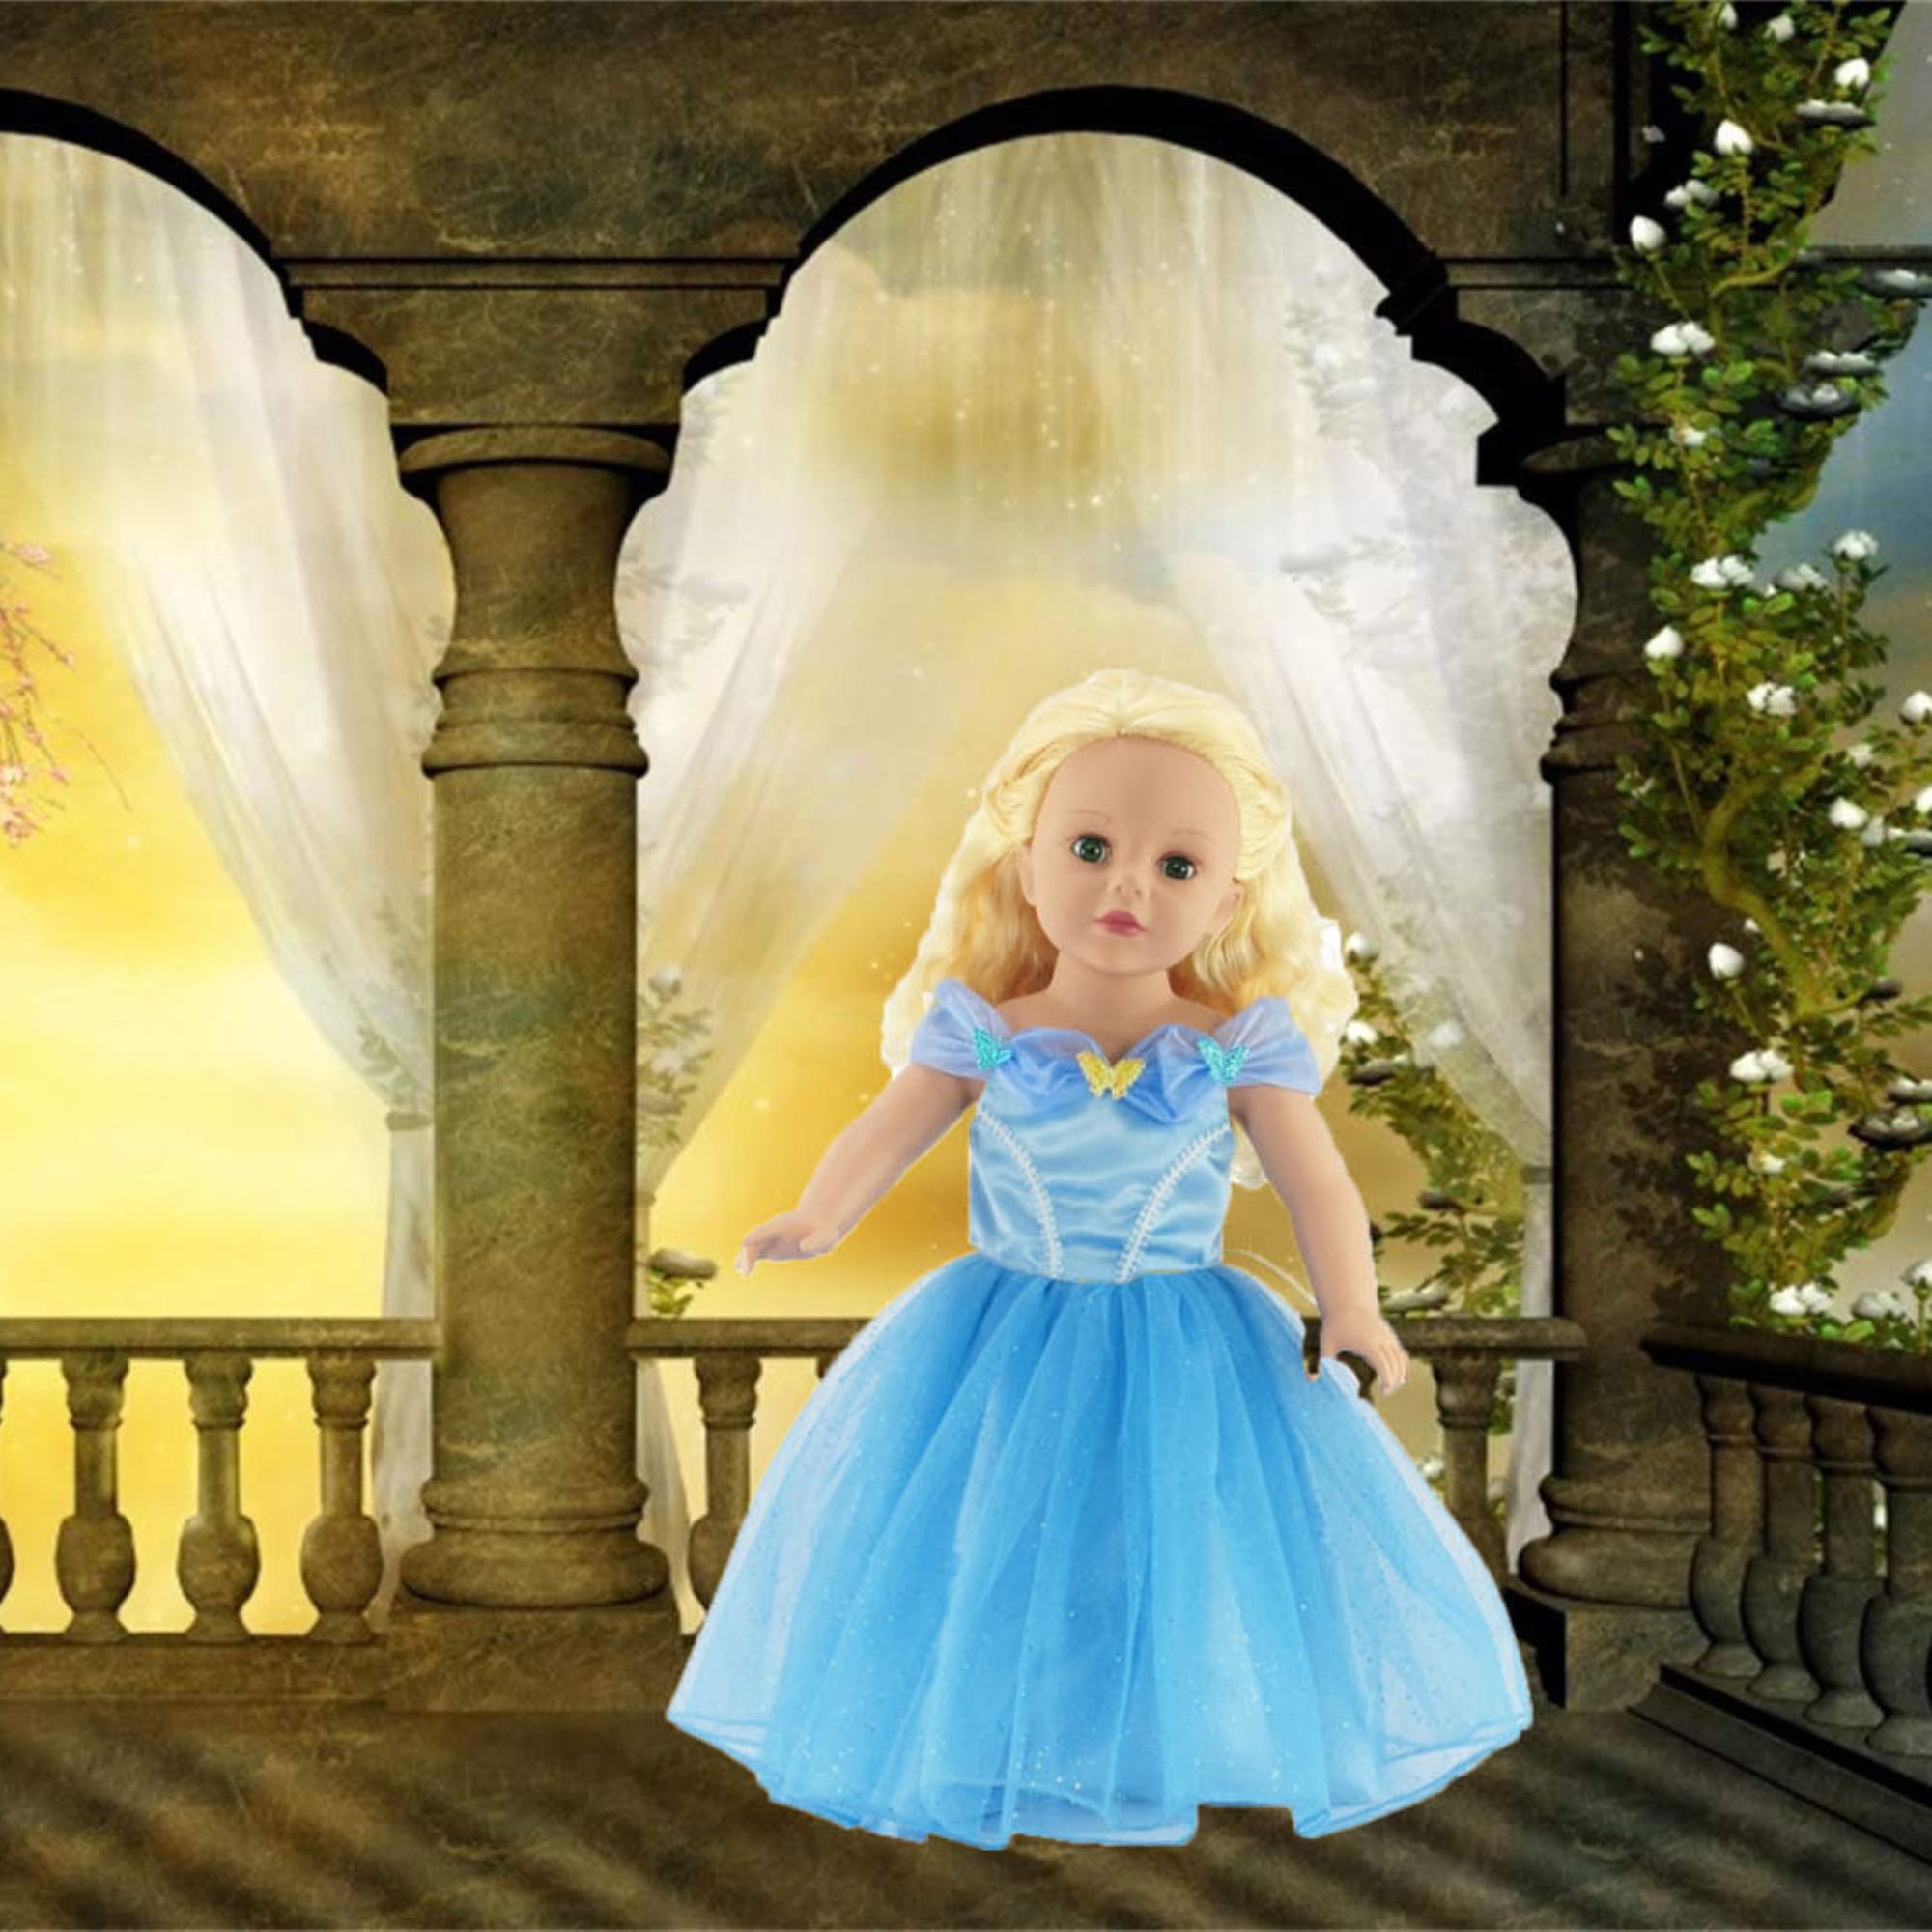 Emily Rose 18 Inch Doll Princess Costume Dress Outfit Cinderella-Inspired  Ball Gown - Includes Sparkly 18